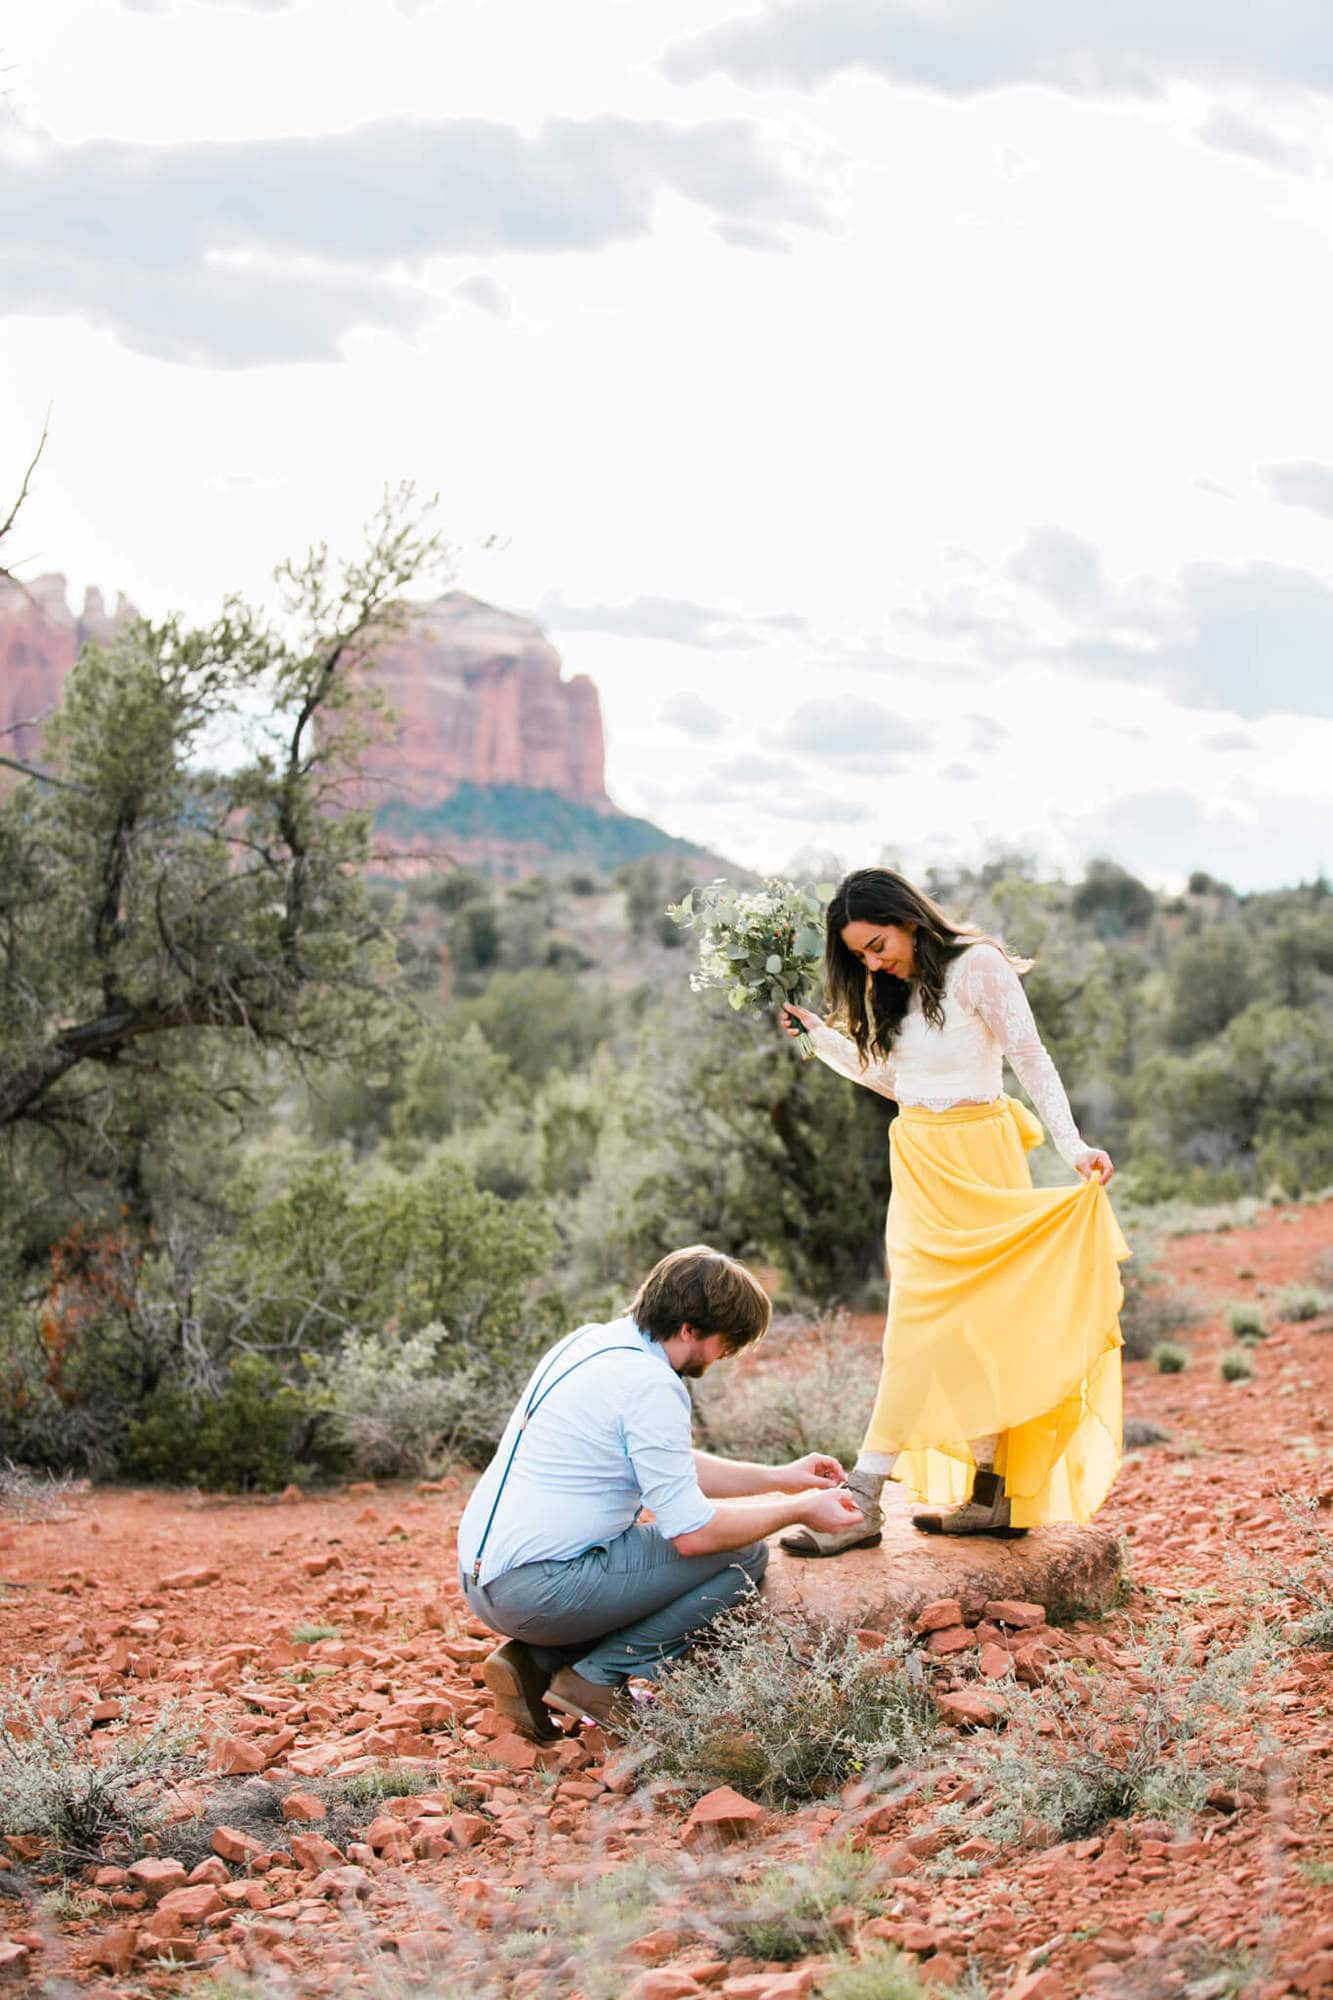 The Arizona desert sky really showed off for this one! Check out Emmy + Keal's beautiful red rock Sedona Elopement-Style vow renewal.